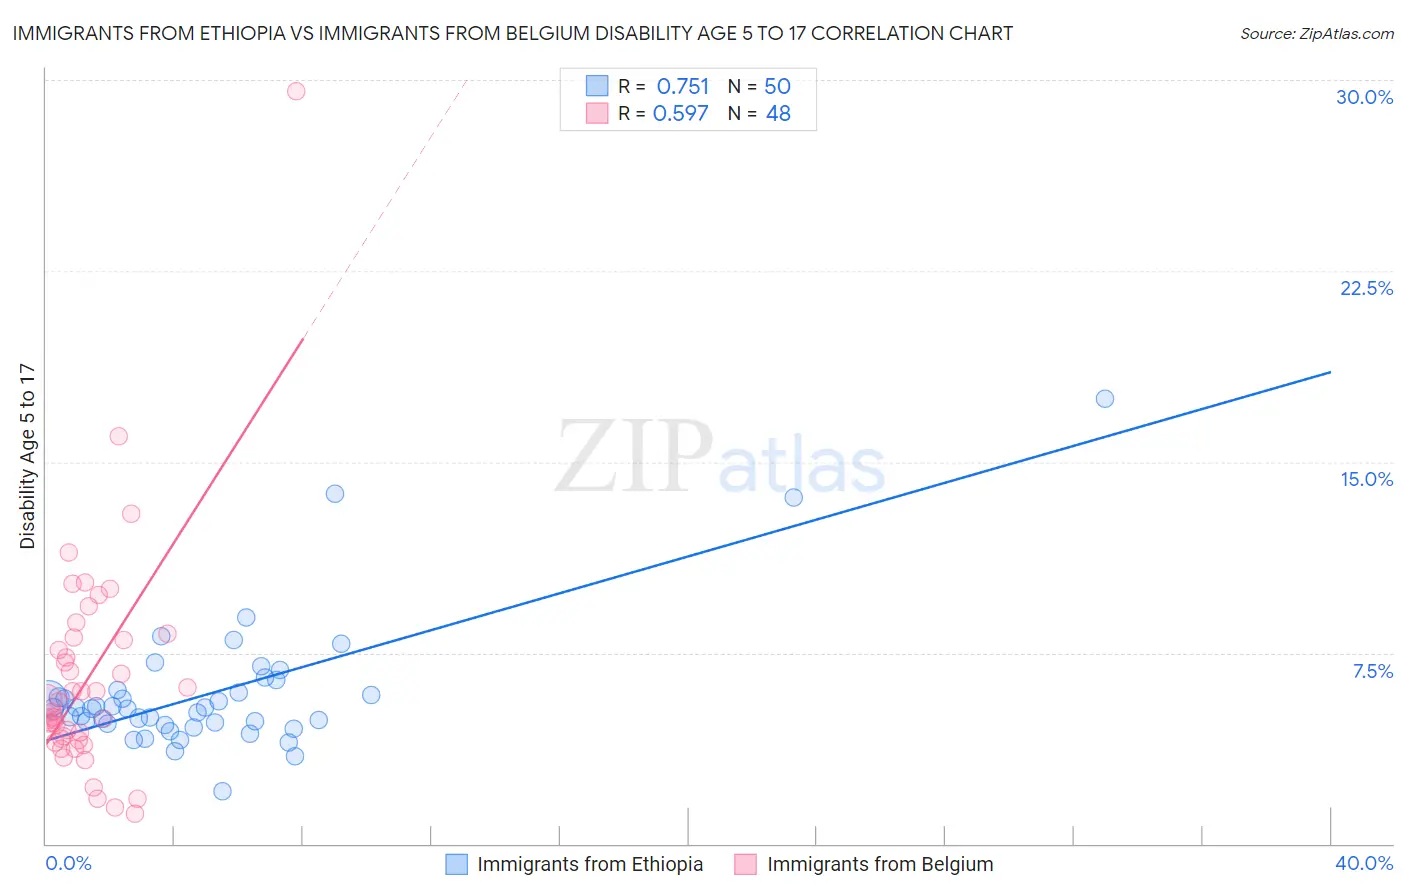 Immigrants from Ethiopia vs Immigrants from Belgium Disability Age 5 to 17